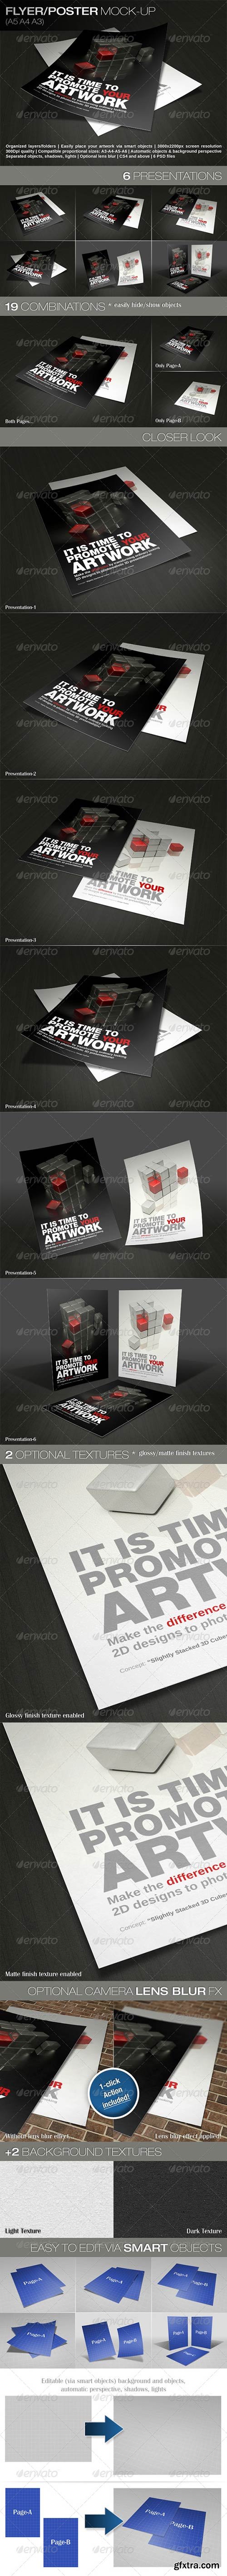 GraphicRiver - Photorealistic Flyer/Poster Mock-Up